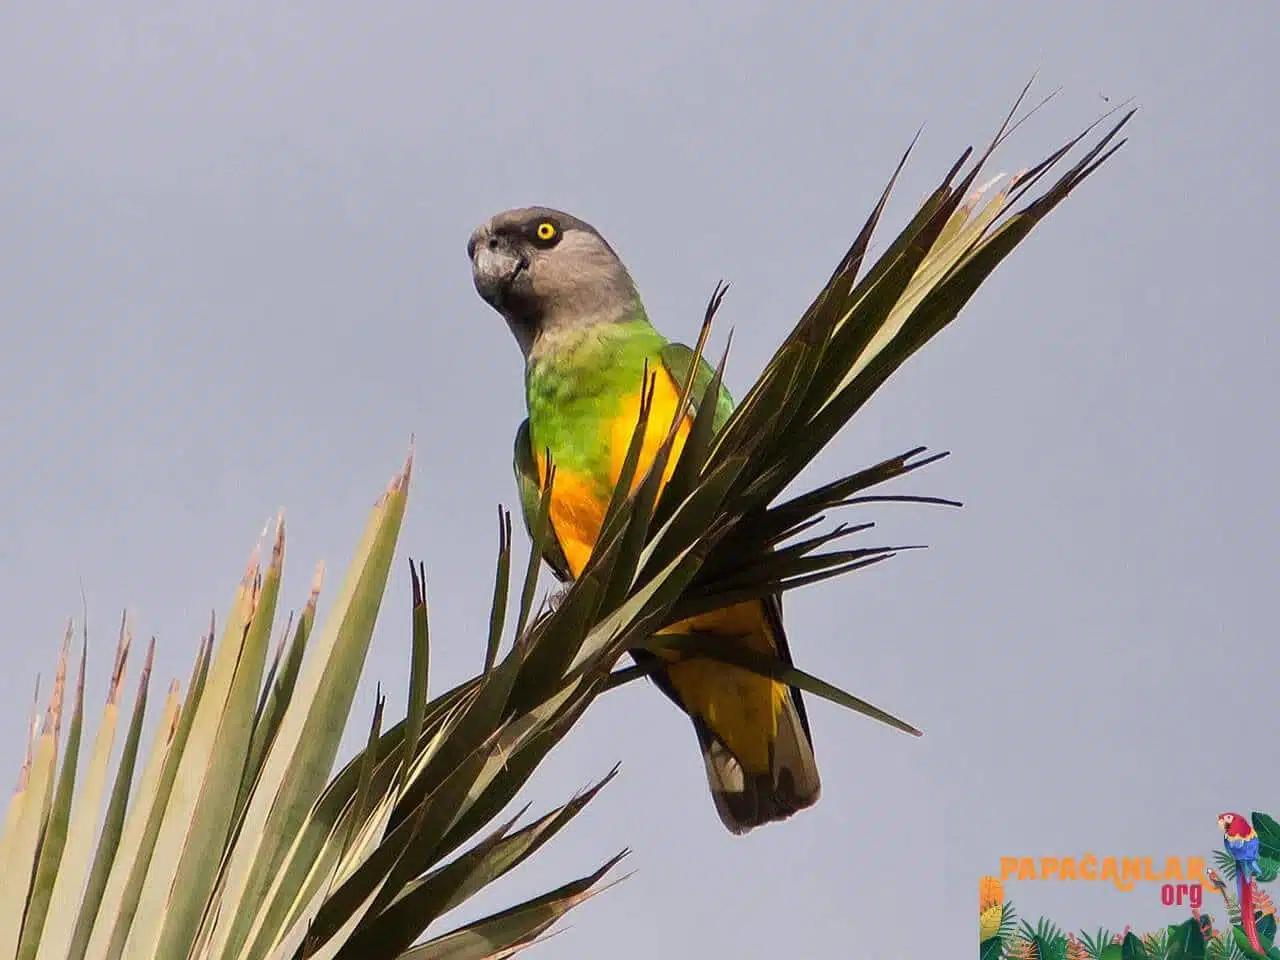 How much does a Senegalese parrot cost?